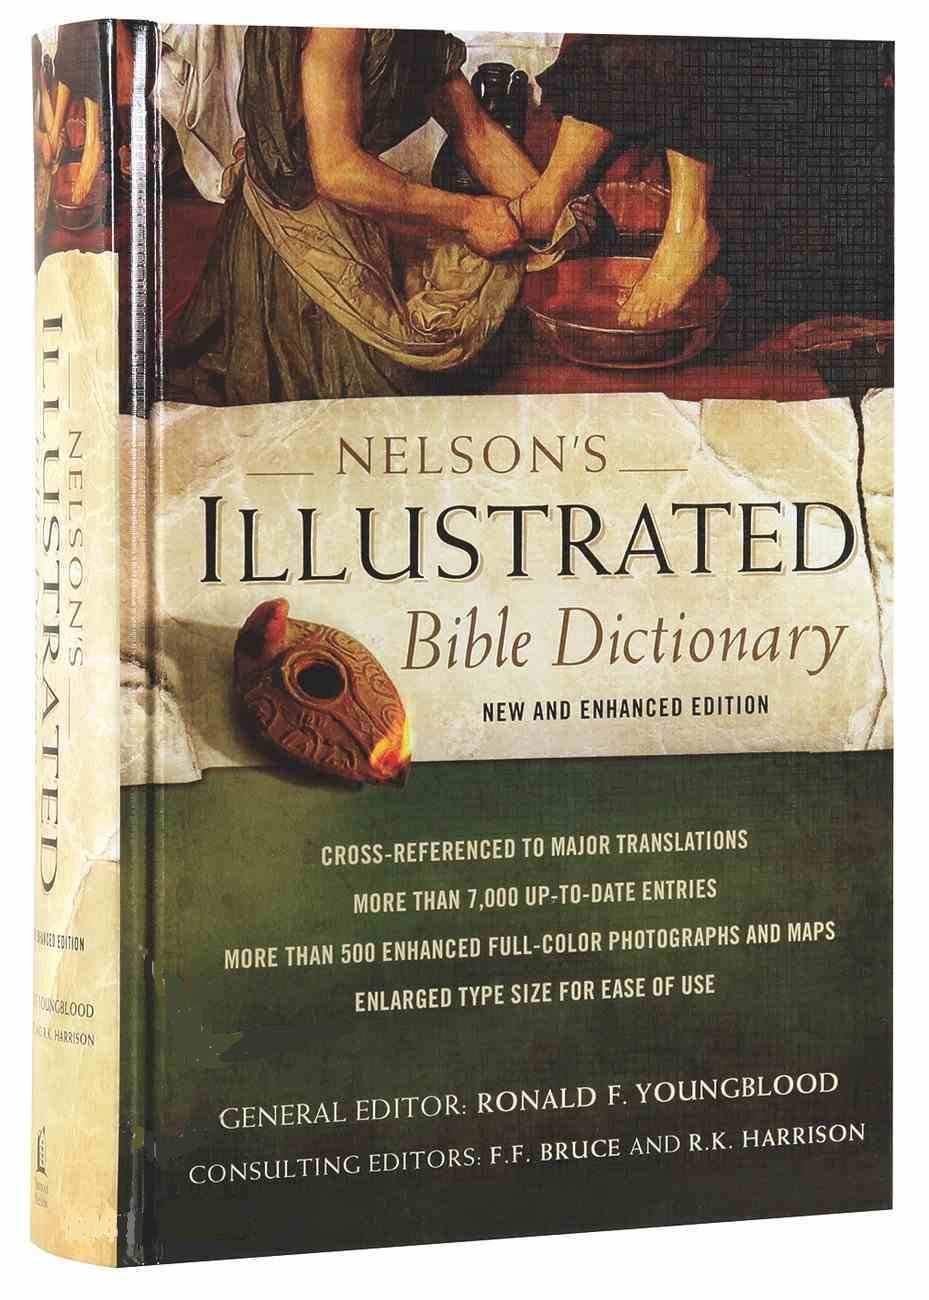 Nelson's Illustrated Bible Dictionary - New and Enhanced Edition (2014)